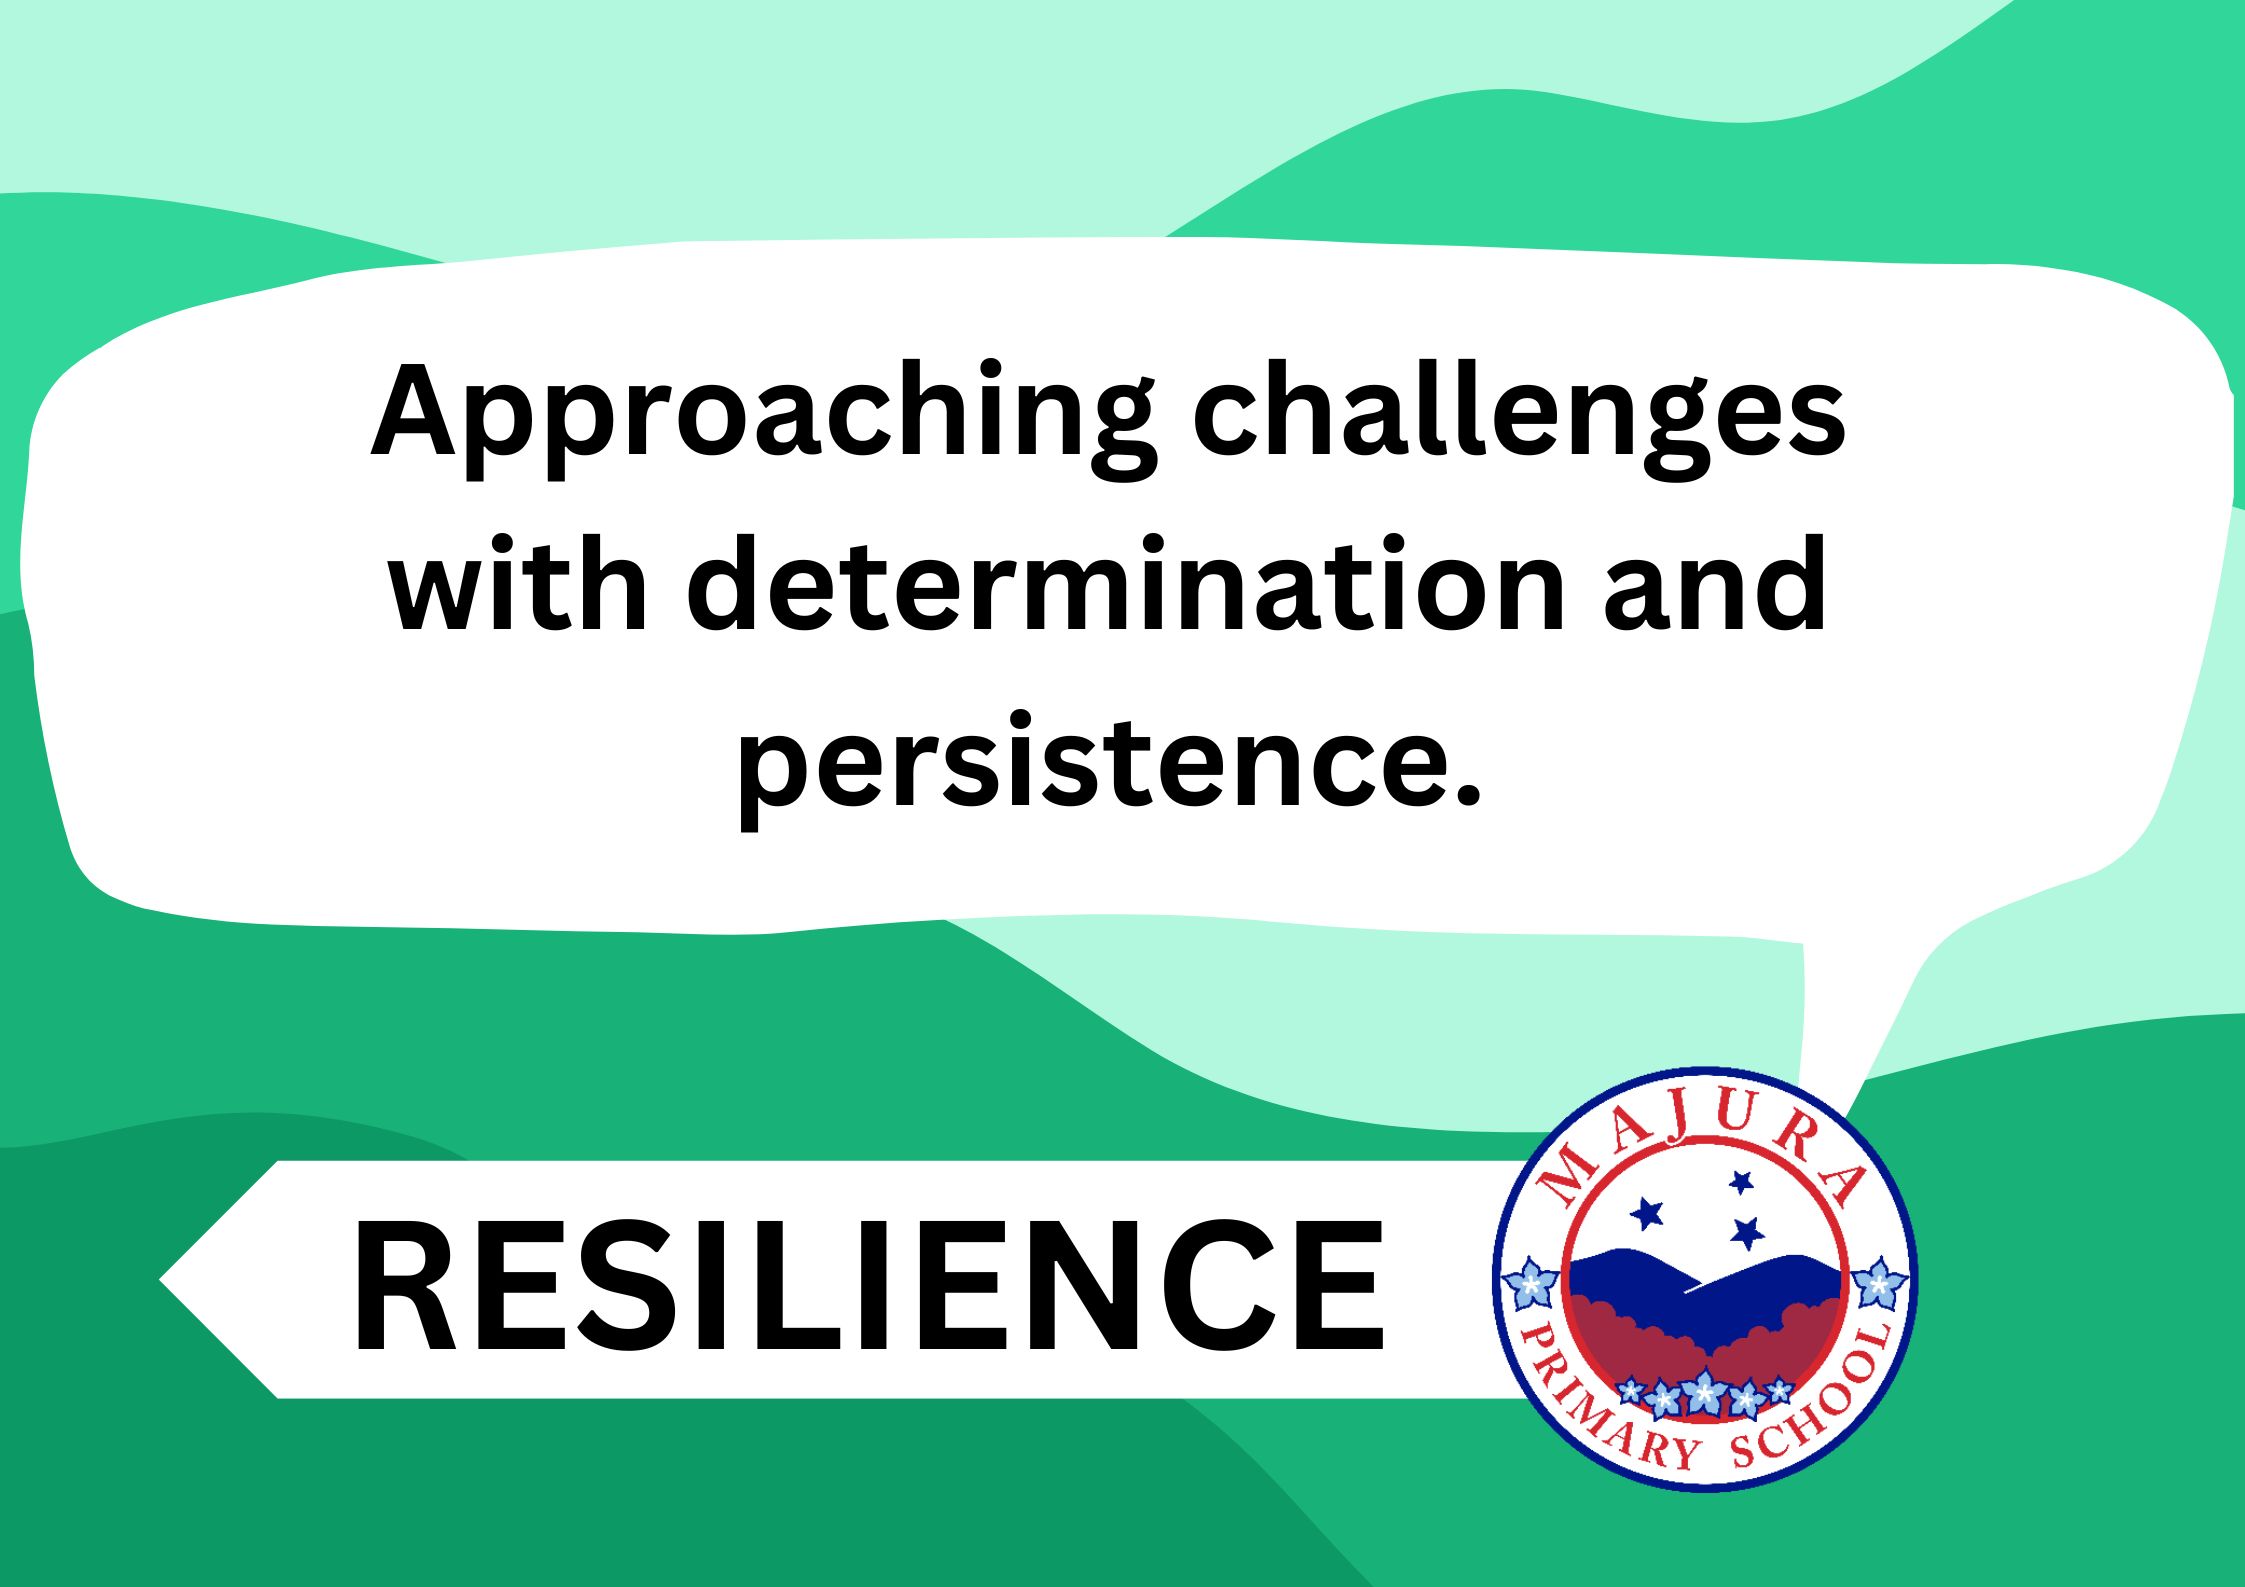 Next to the Majura Primary logo is the word 'Resilience'. Above this is a speech bubble that reads 'Approaching challenges with determination and persistence'.